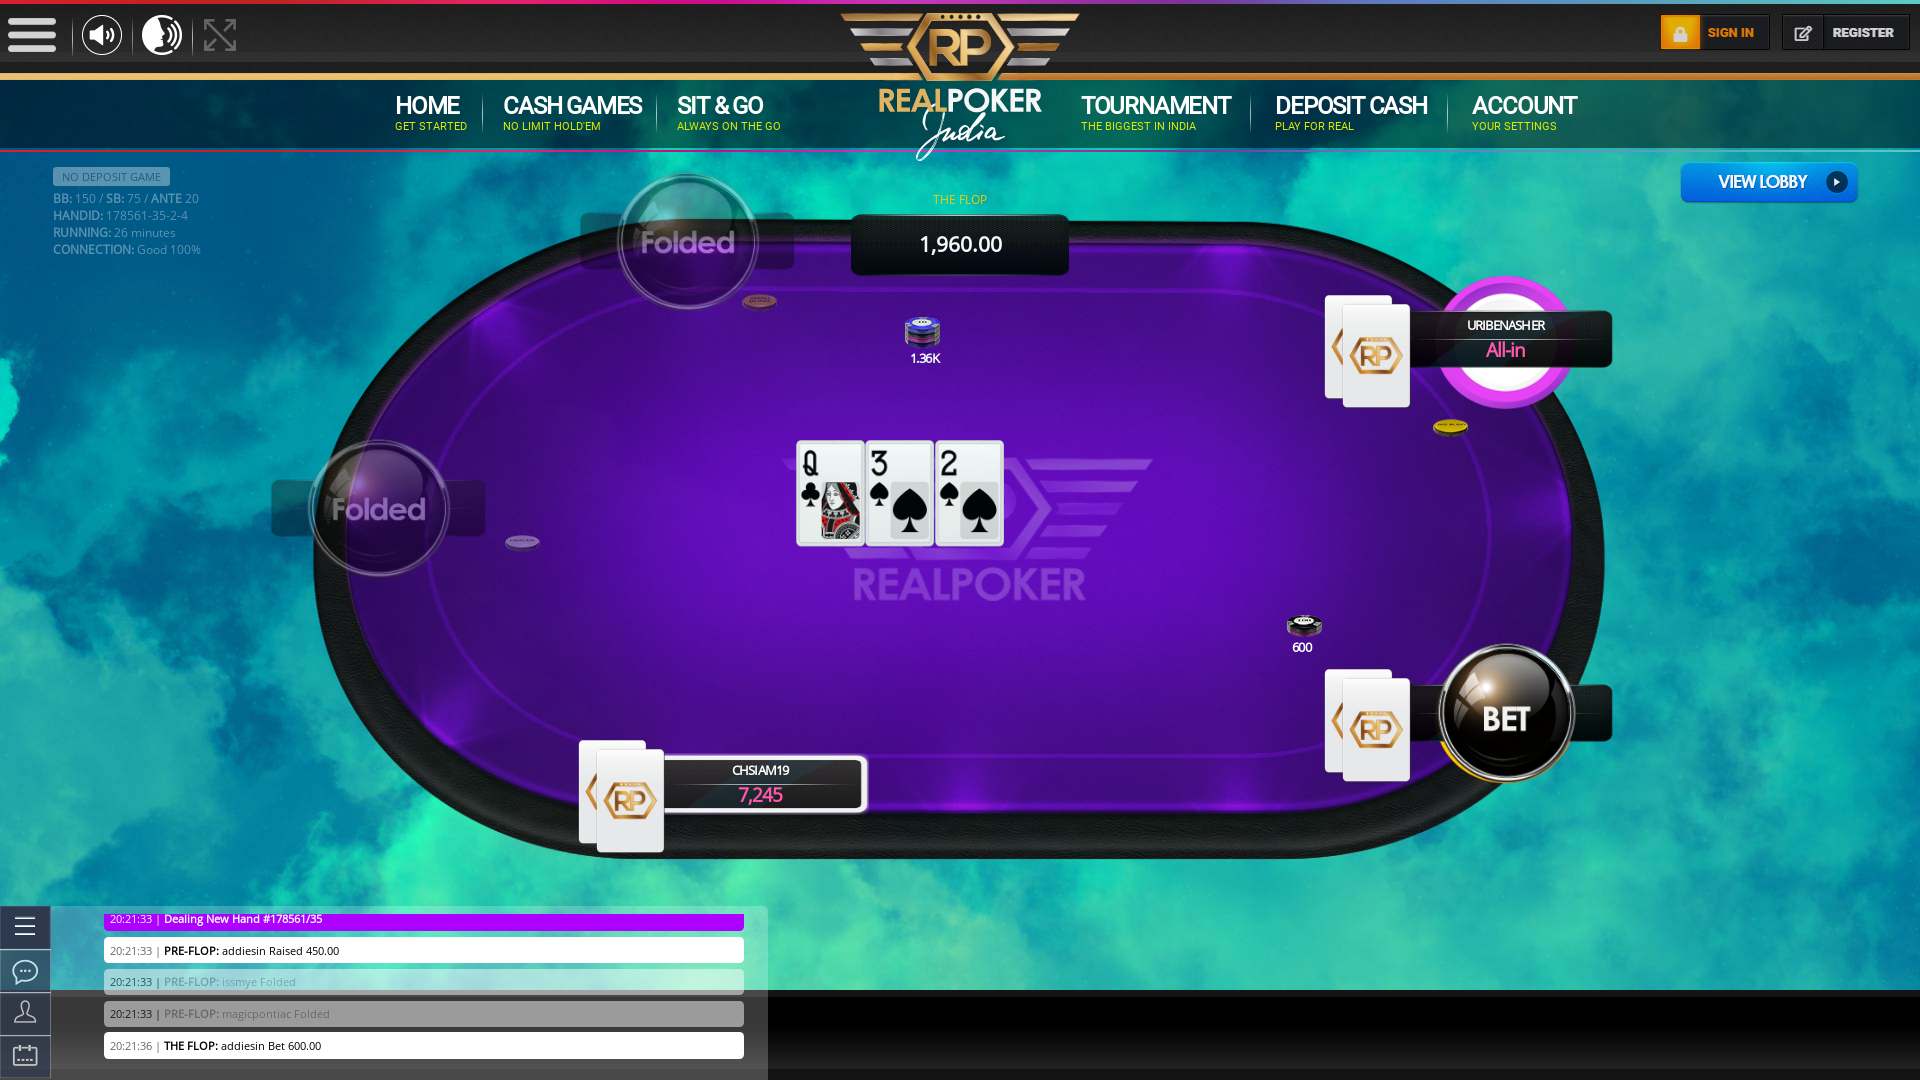 Real Indian poker on a 10 player table in the 26th minute of the game